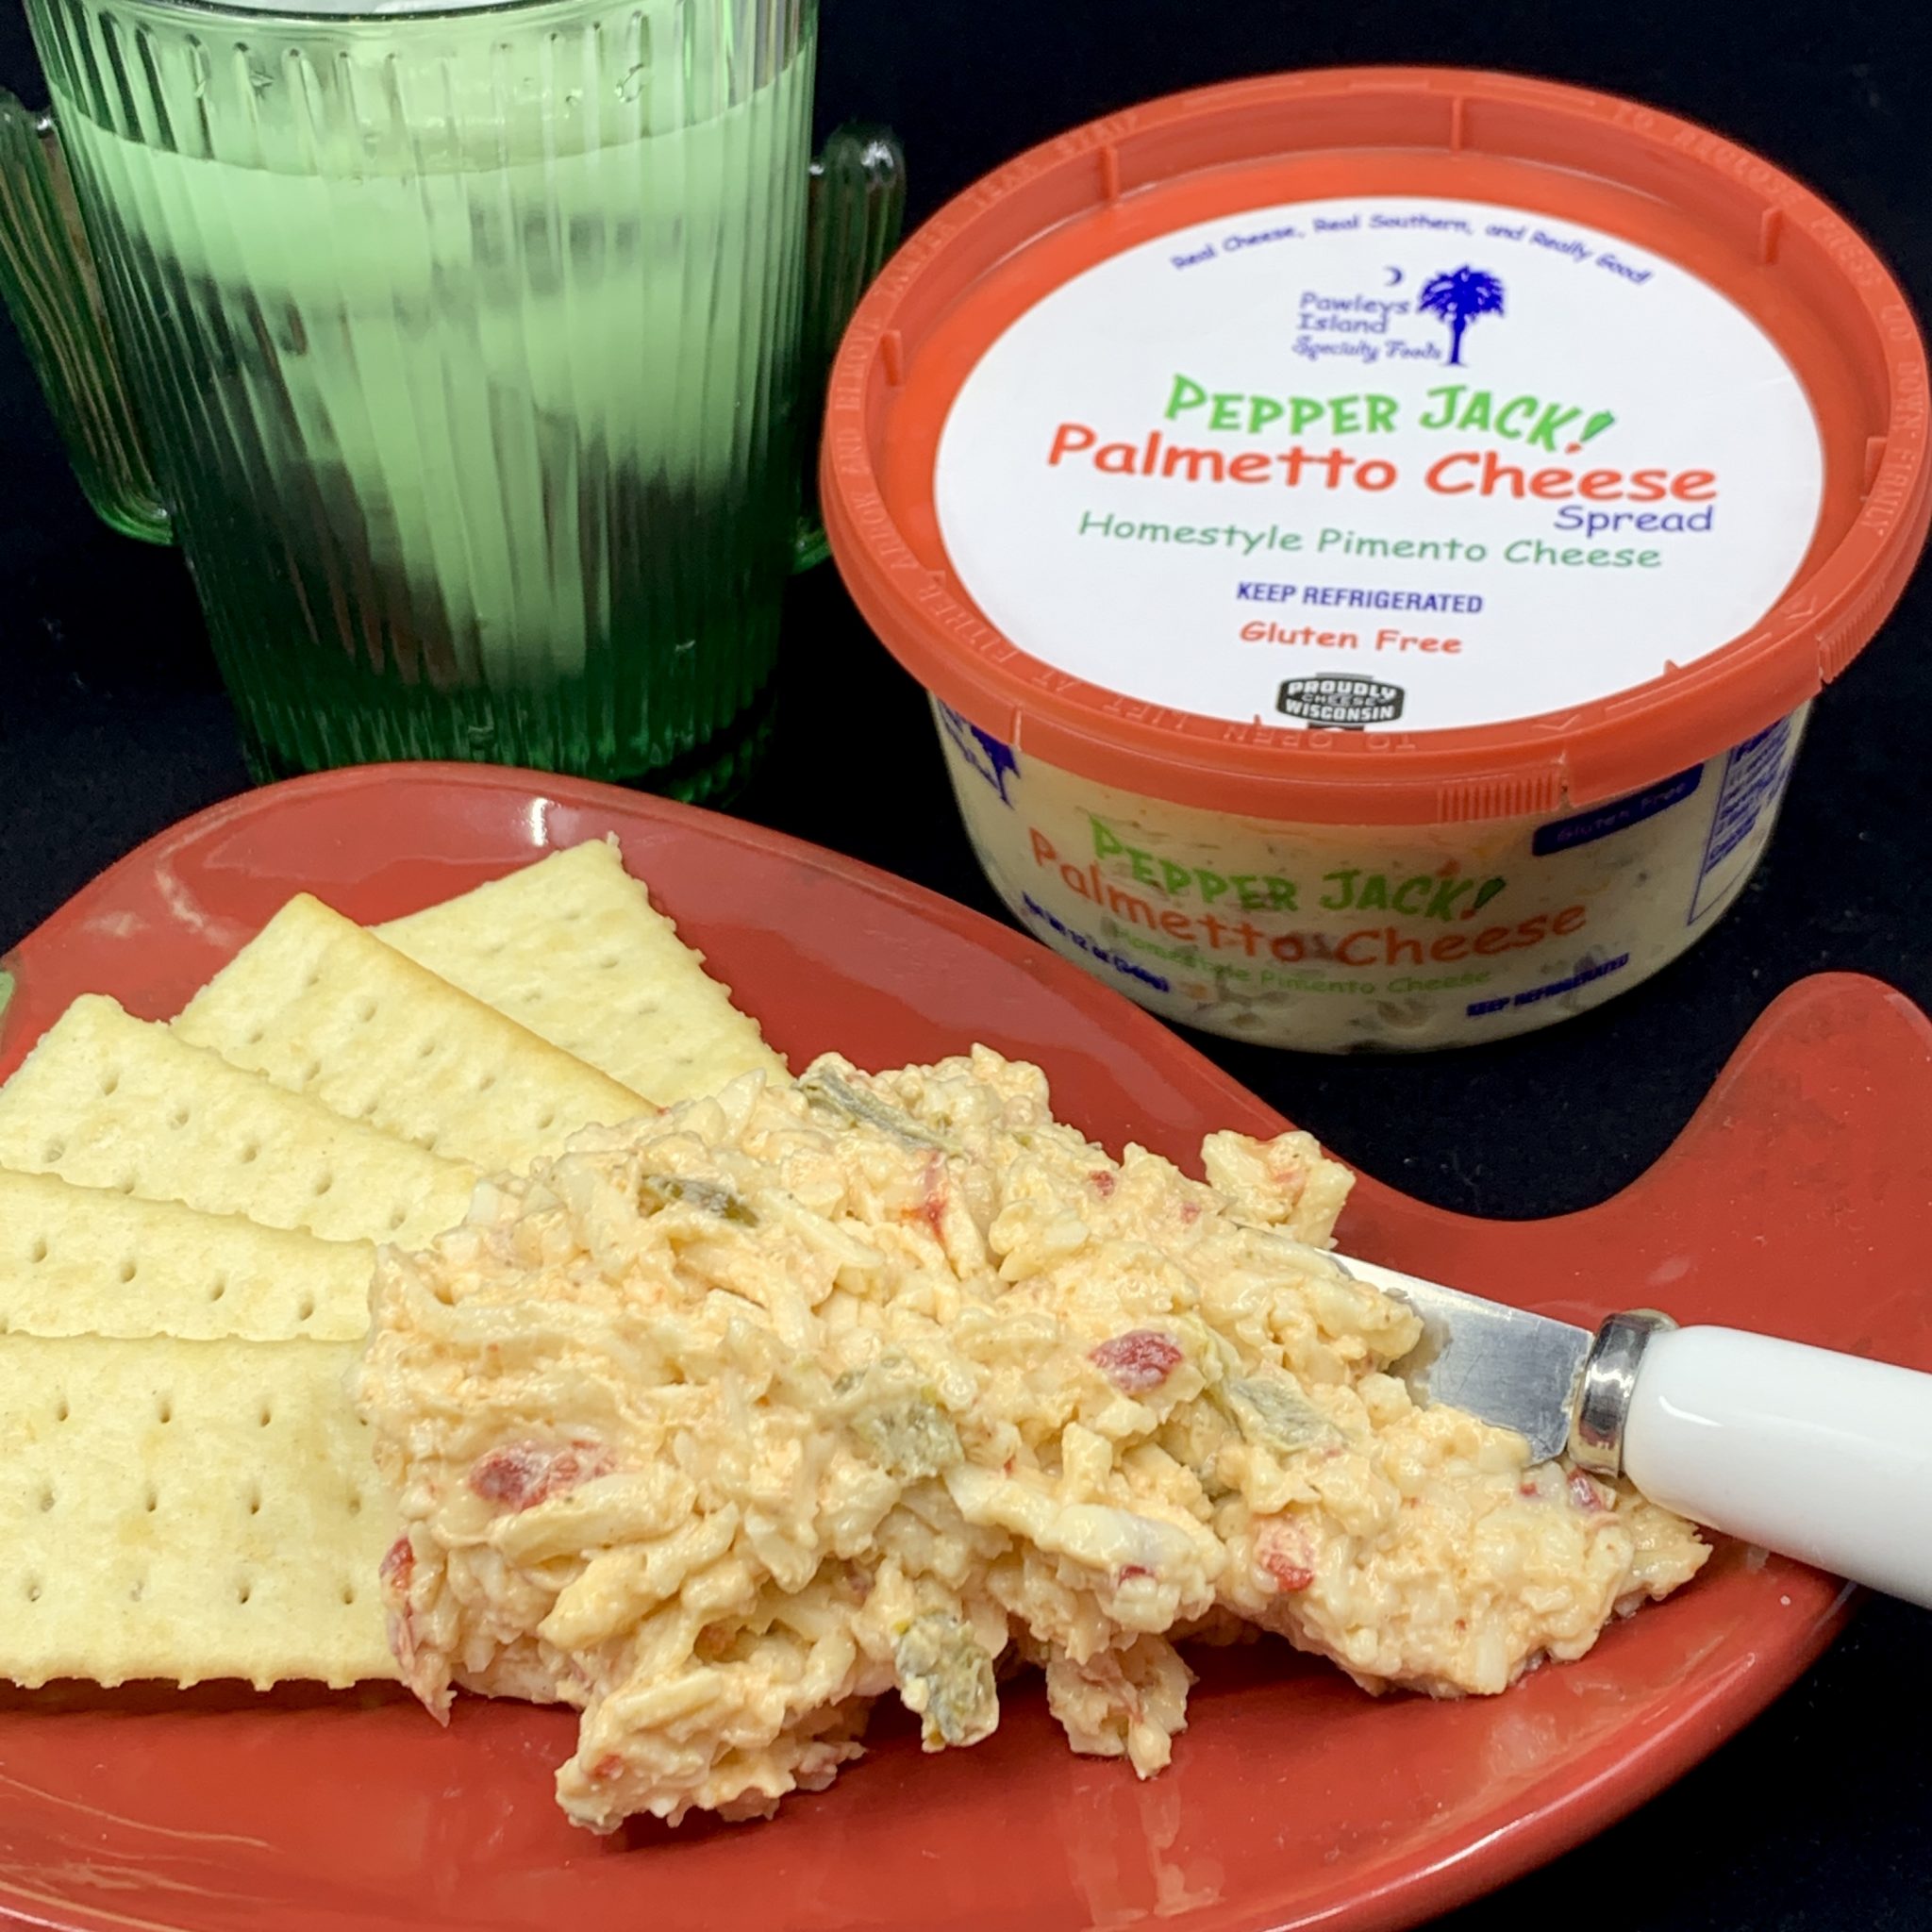 Pepper Jack Palmetto Cheese Pawleys Island Specialty Foods